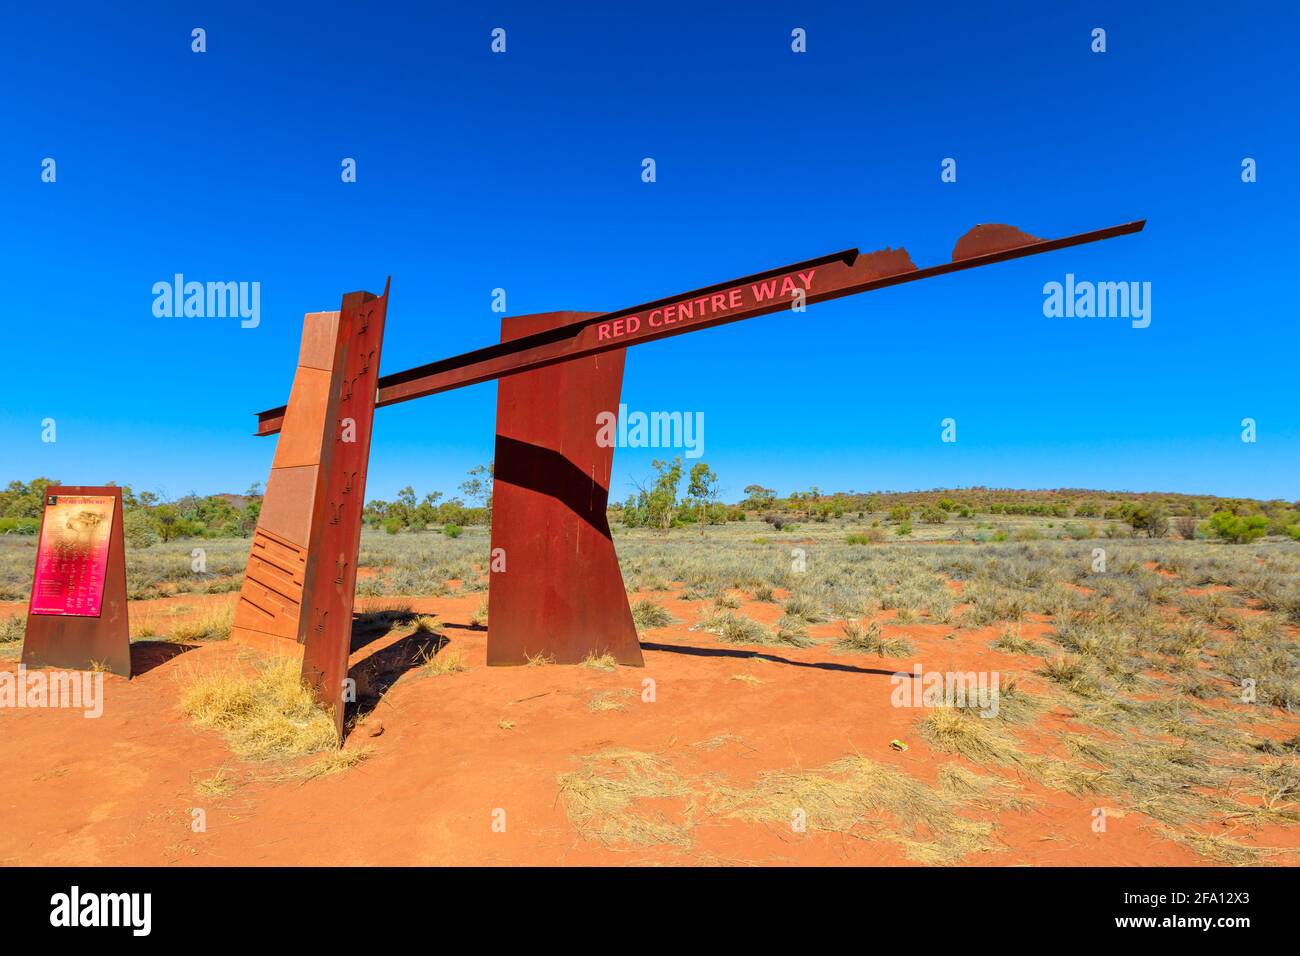 Alice Springs, Northern Territory Outback, Australia - Aug 16, 2019: Red Centre Way sign on Larapinta drive Highway of Alice Springs. Tourism in Stock Photo